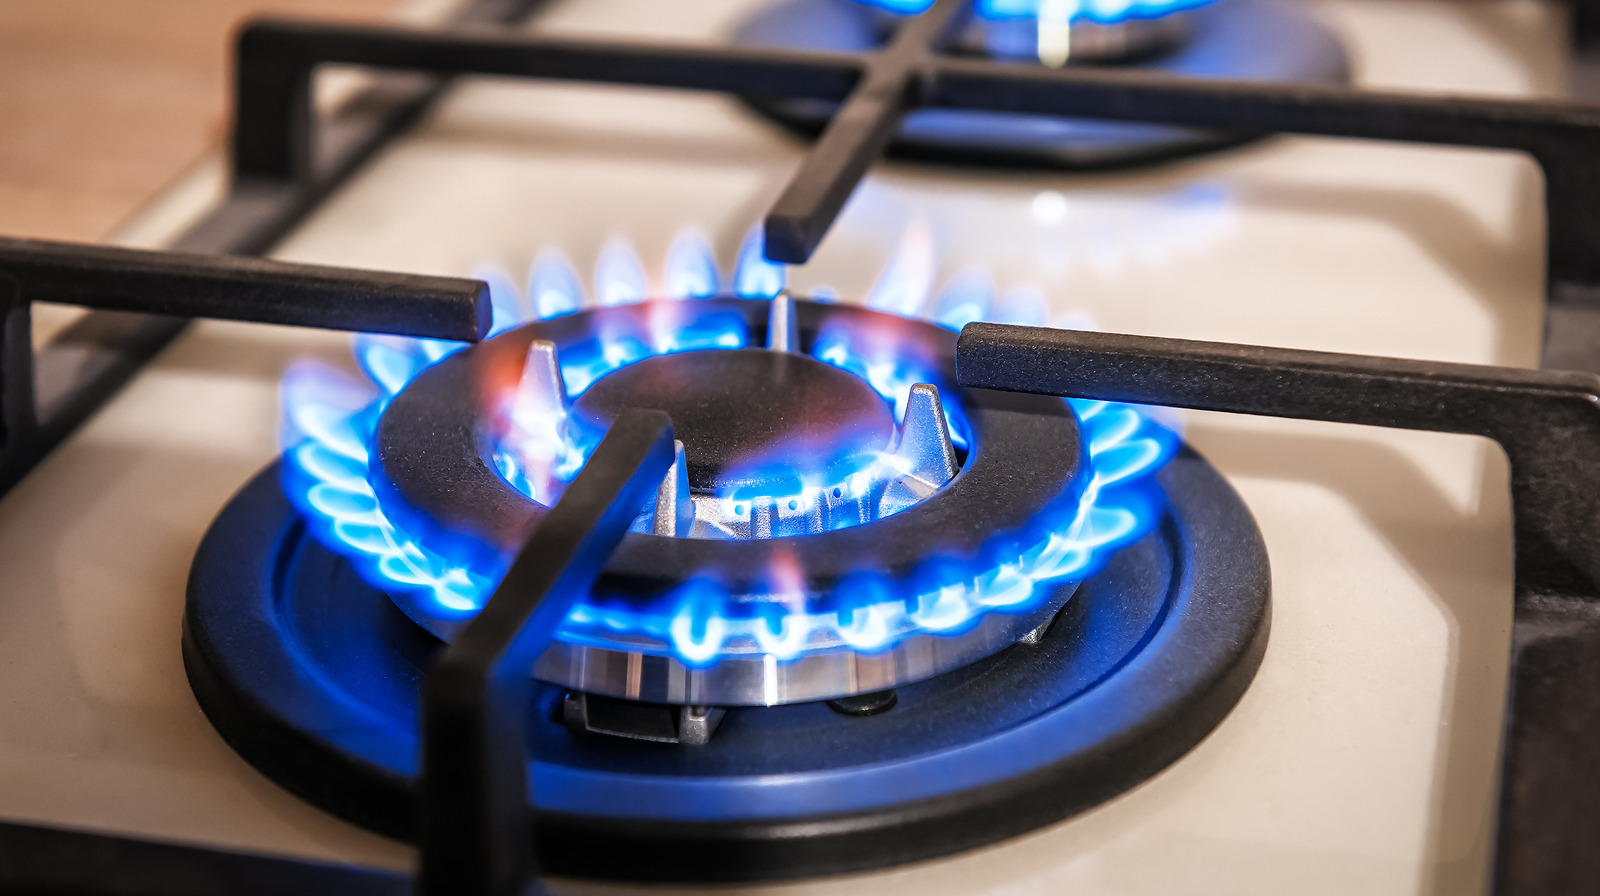 Should You Get a Gas Stove or an Electric Stove?